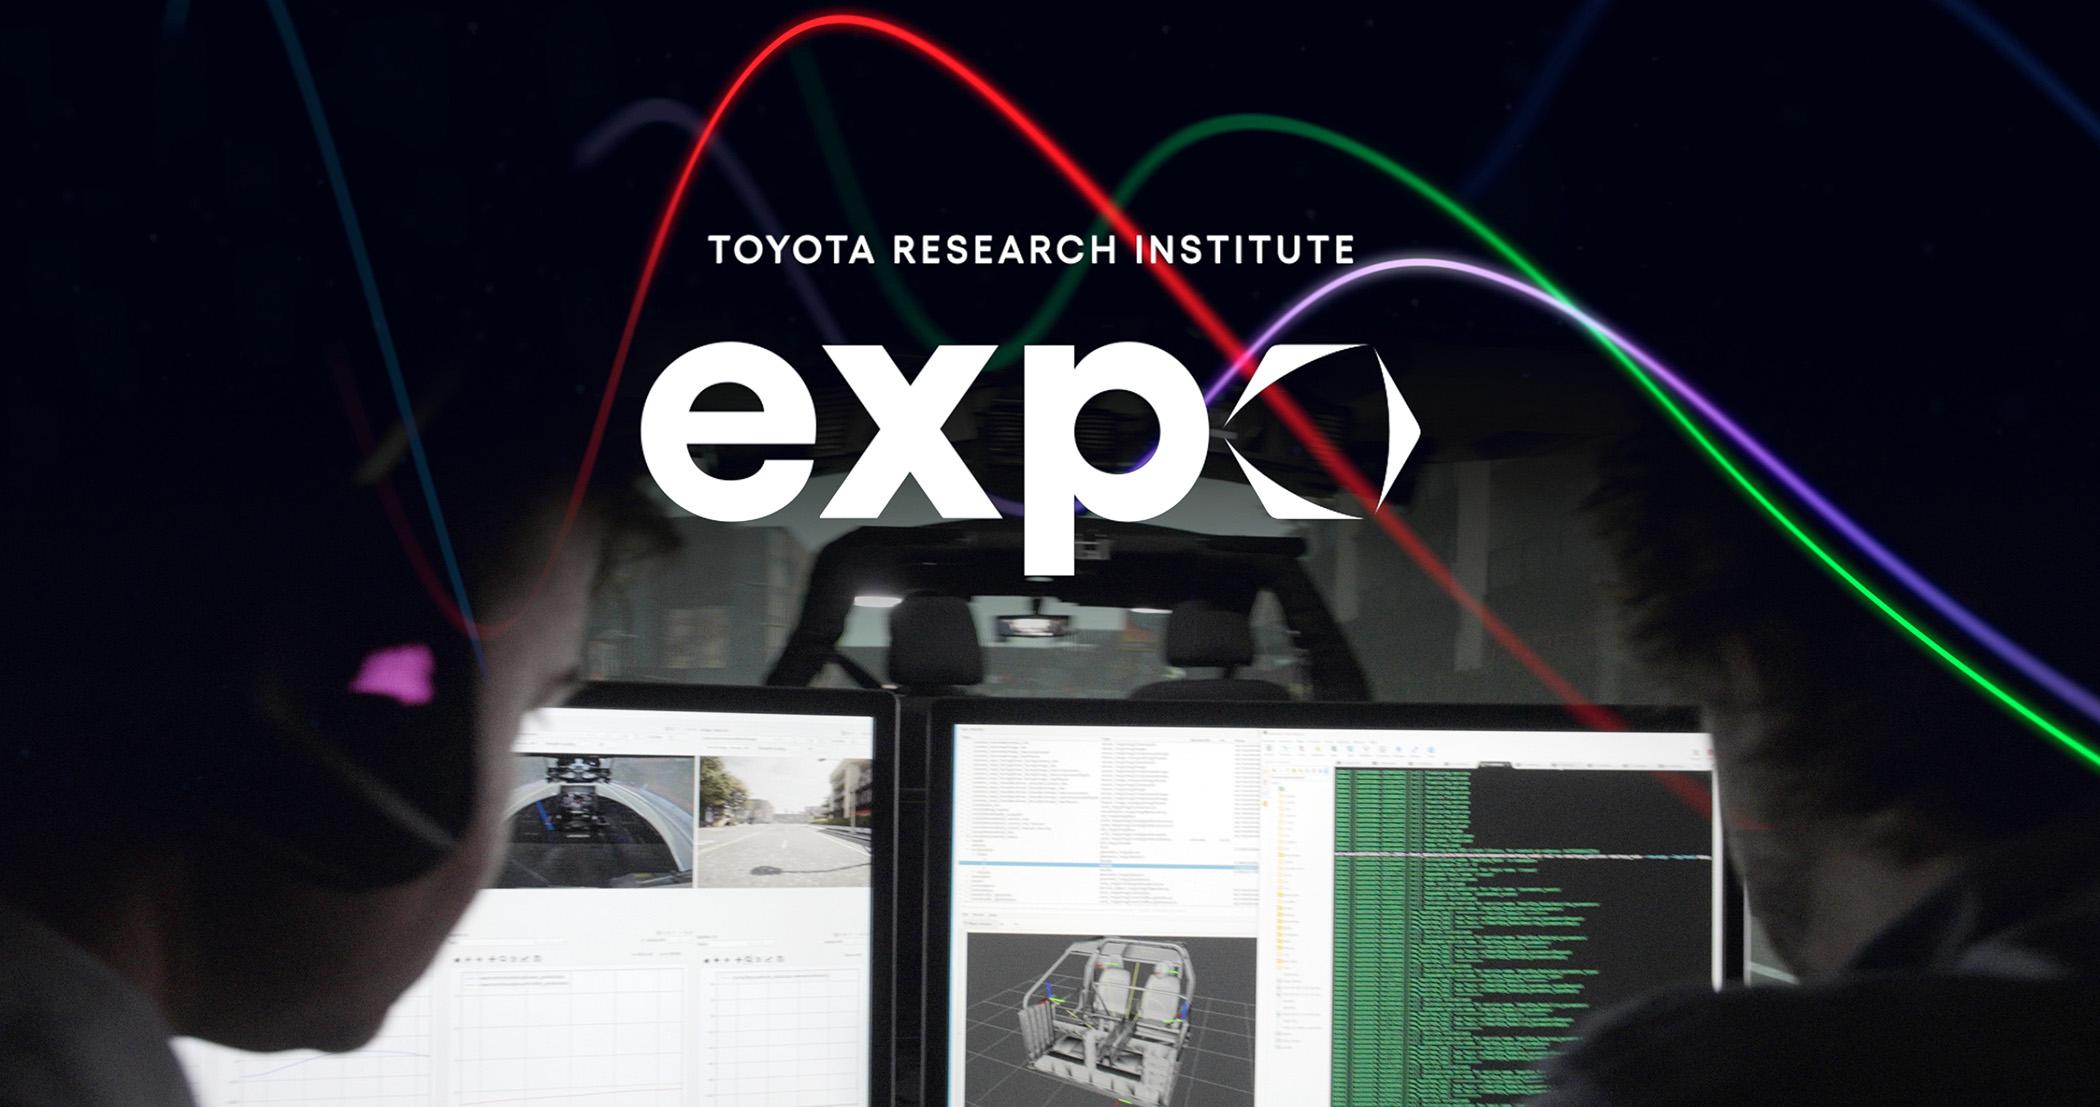 Toyota Research Institute expo image